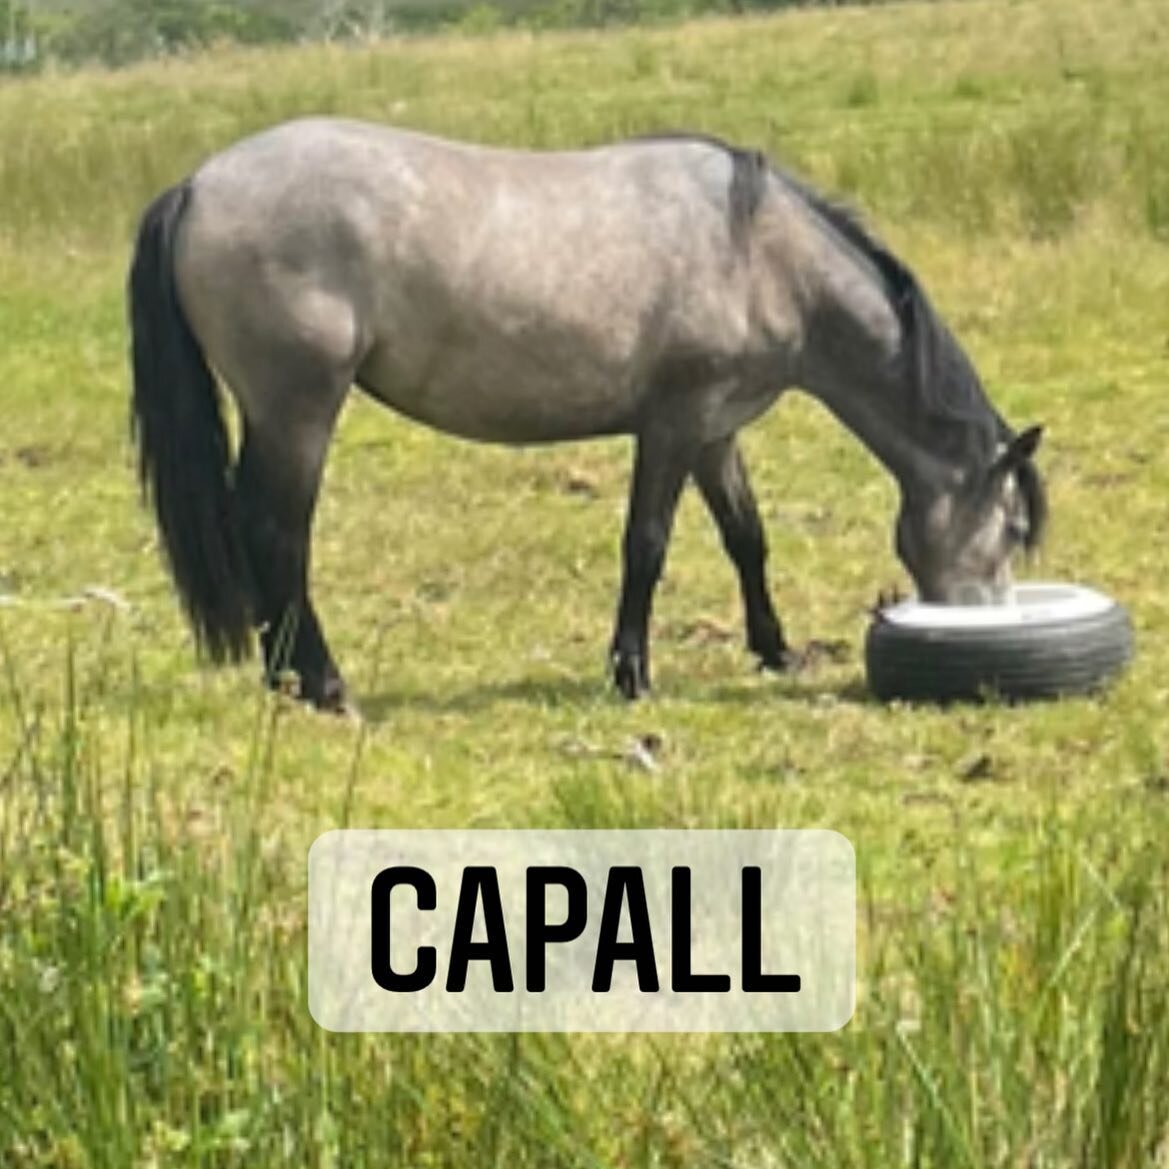 Focal an lae, word of the day. Capall = horse.